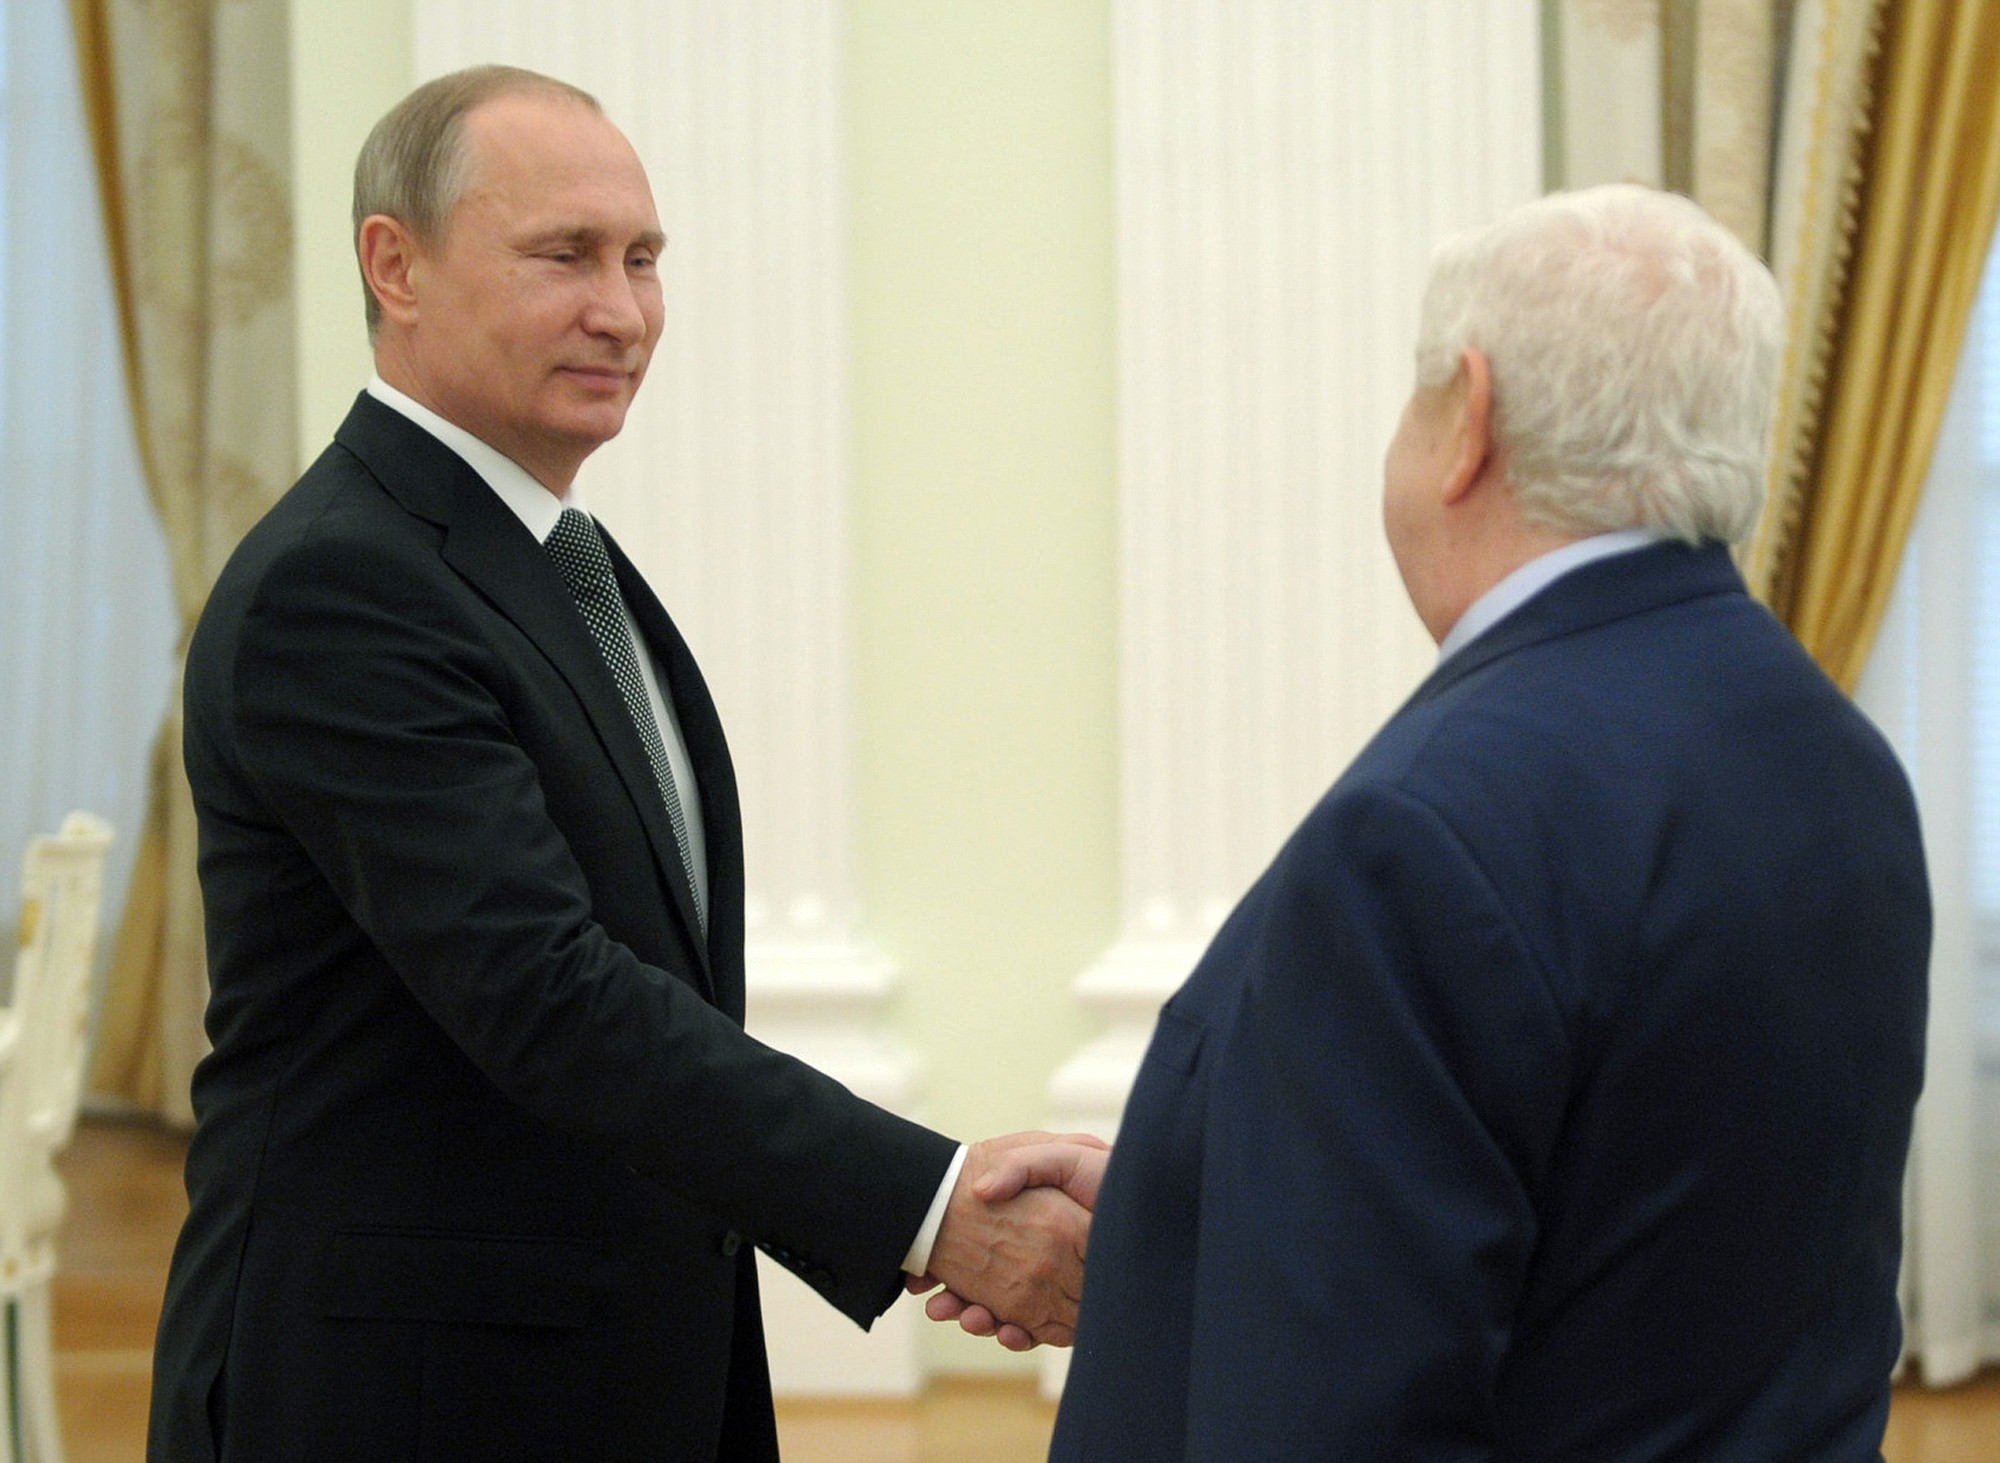 Syrian Foreign Minister Walid al-Mualem, right, meets with Russian President Vladimir Putin in Moscow's Kremlin, Russia on Monday, June 29, 2015.